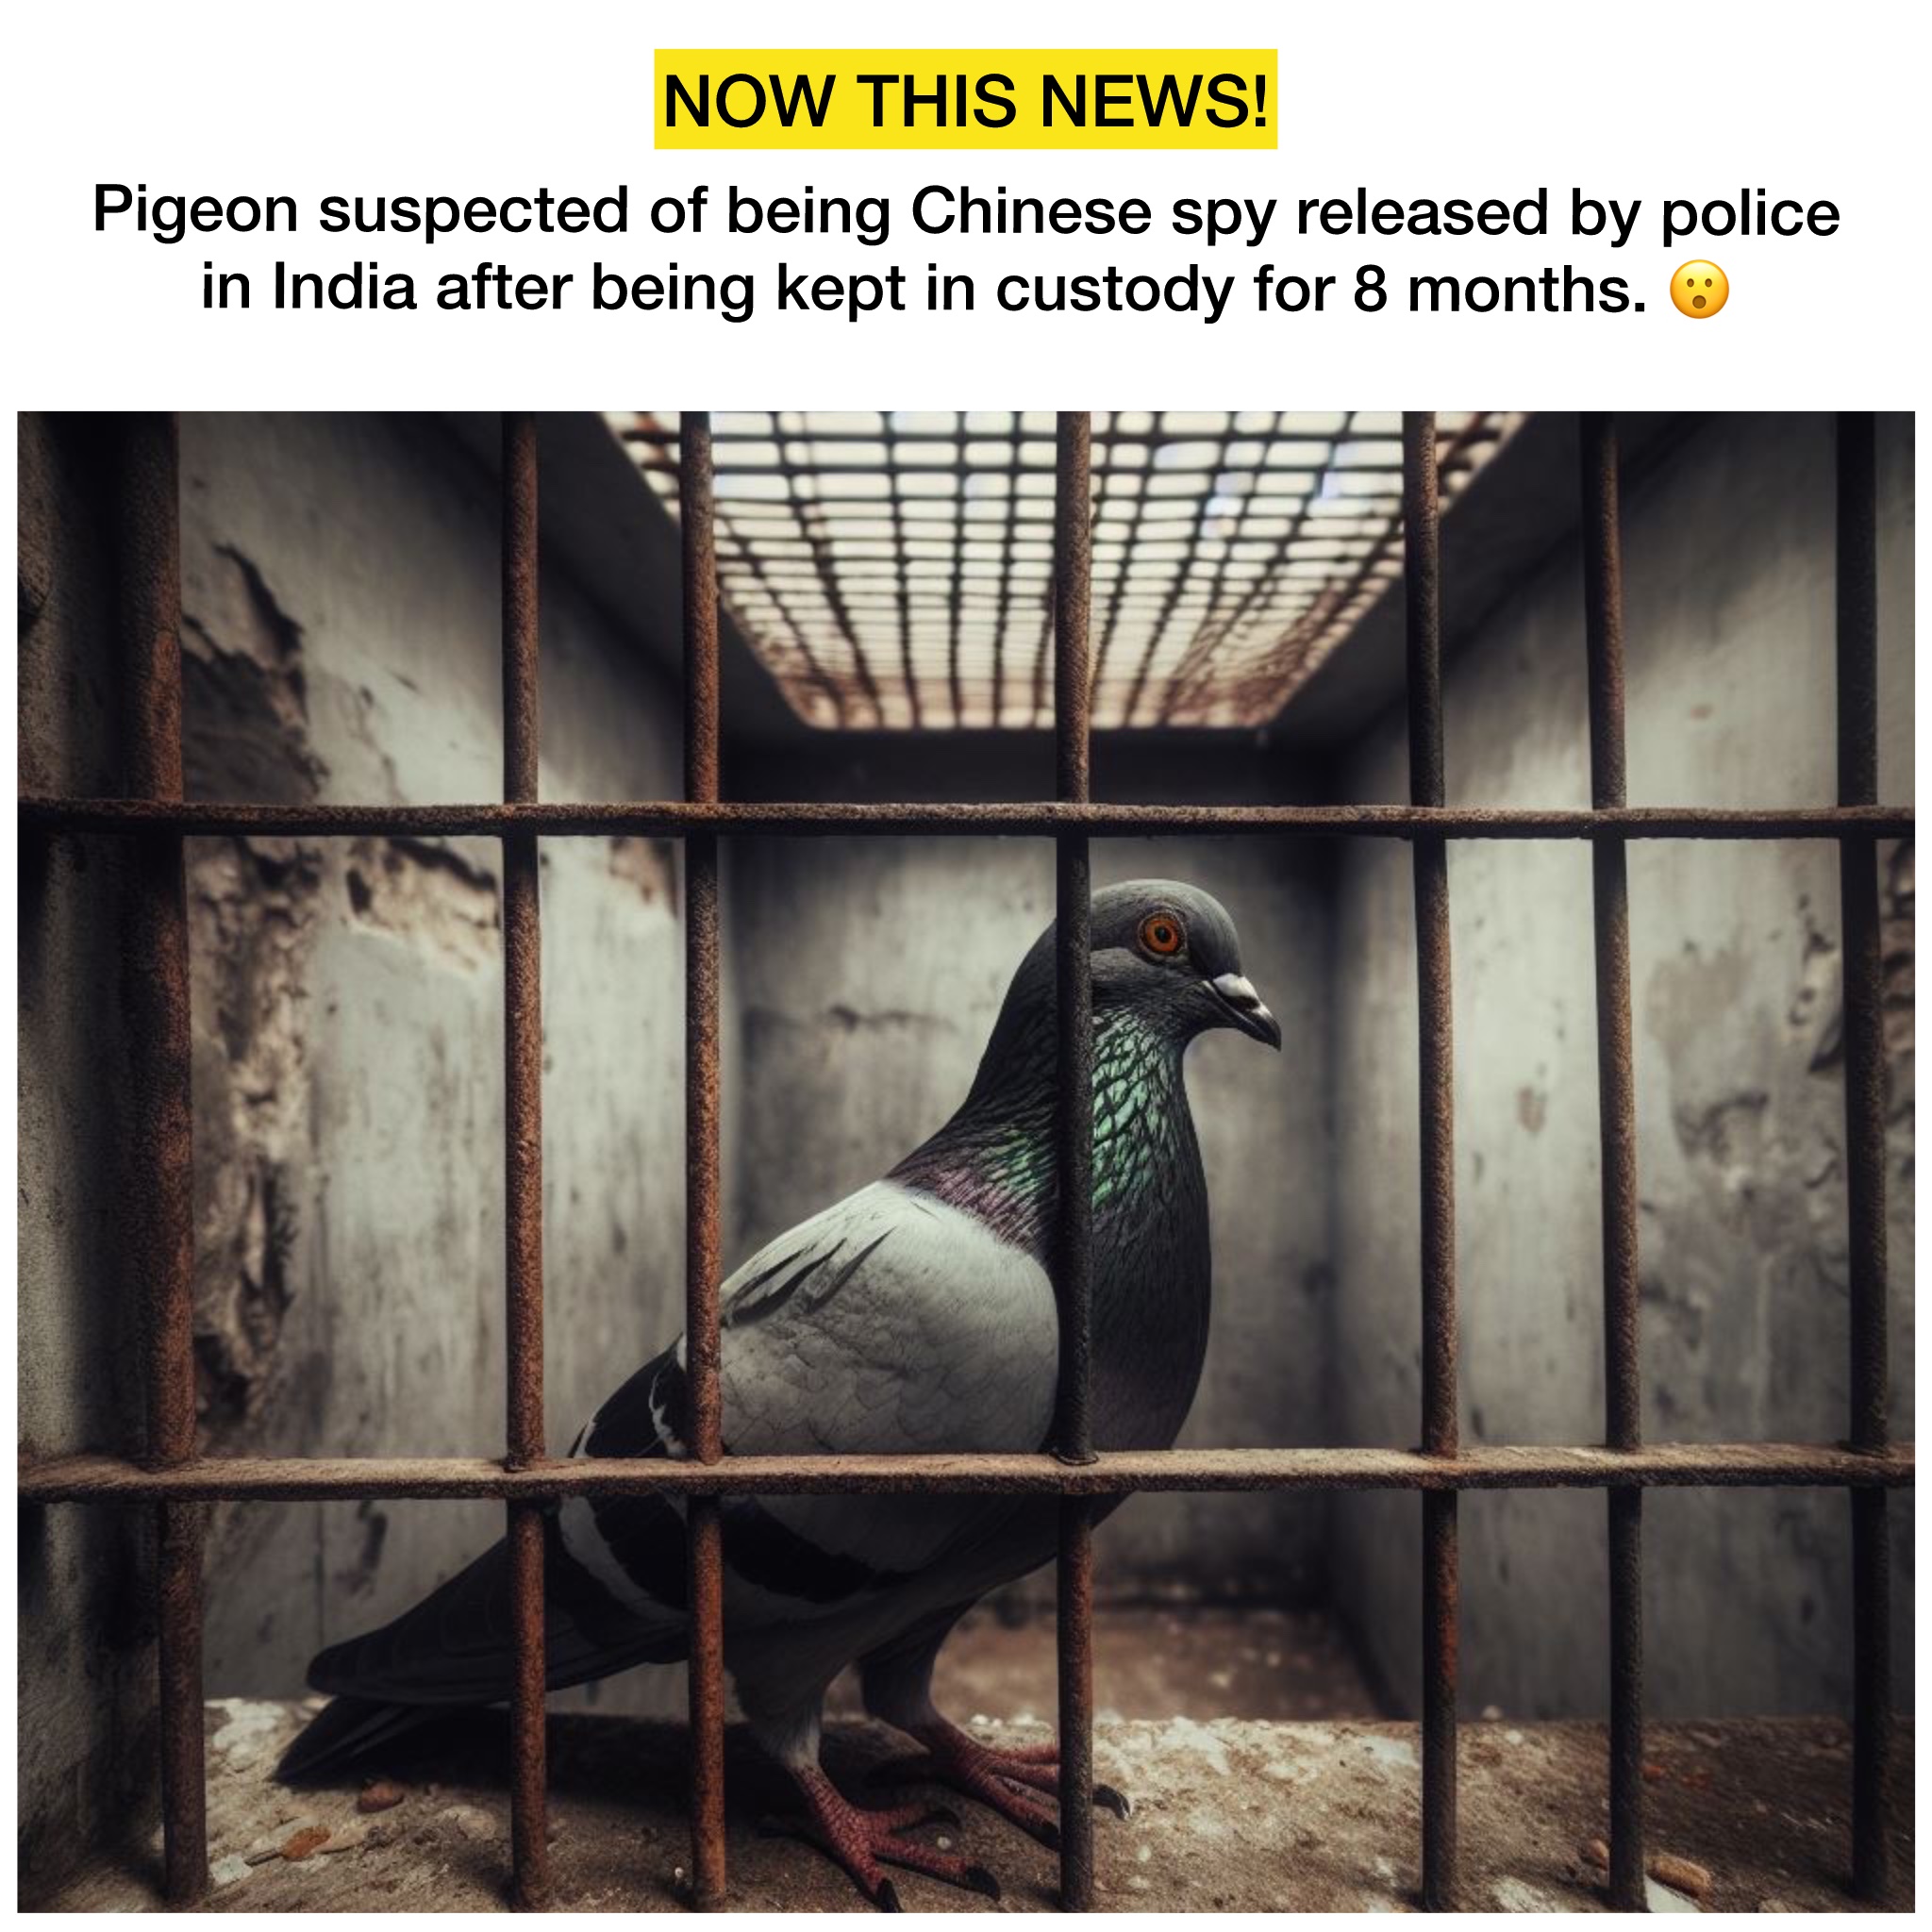 Indian police releases a suspected Chinese spy pigeon after 8 months in bird lockup